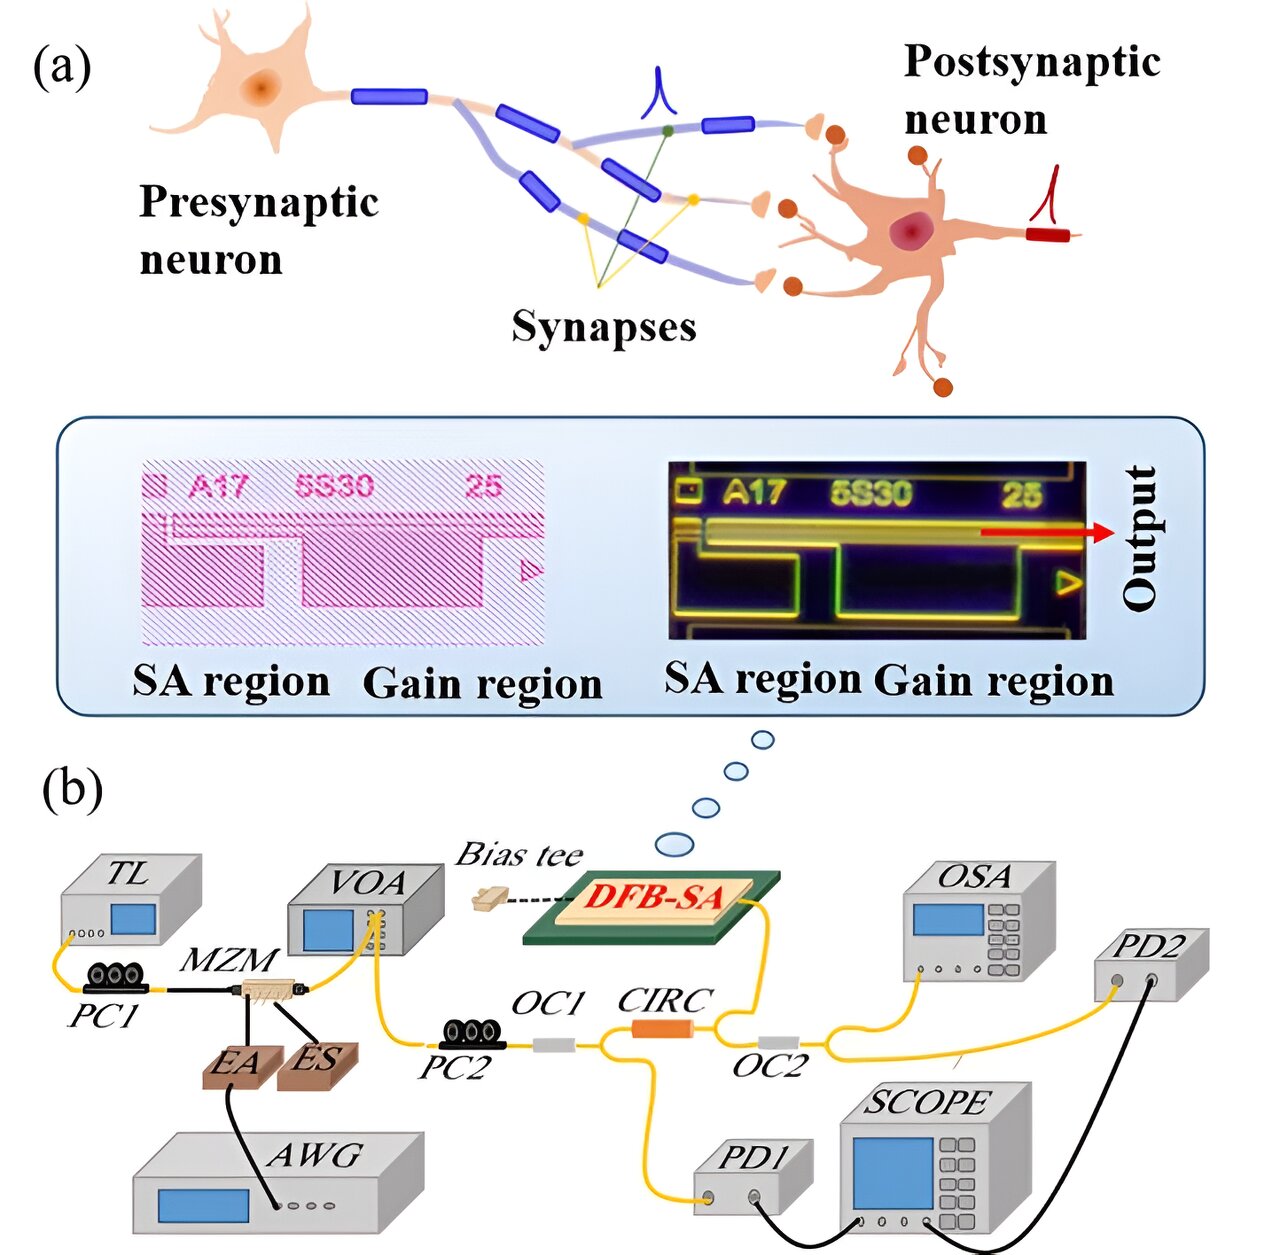 Multi-synaptic photonic spiking neural networks based on a DFB-SA chip